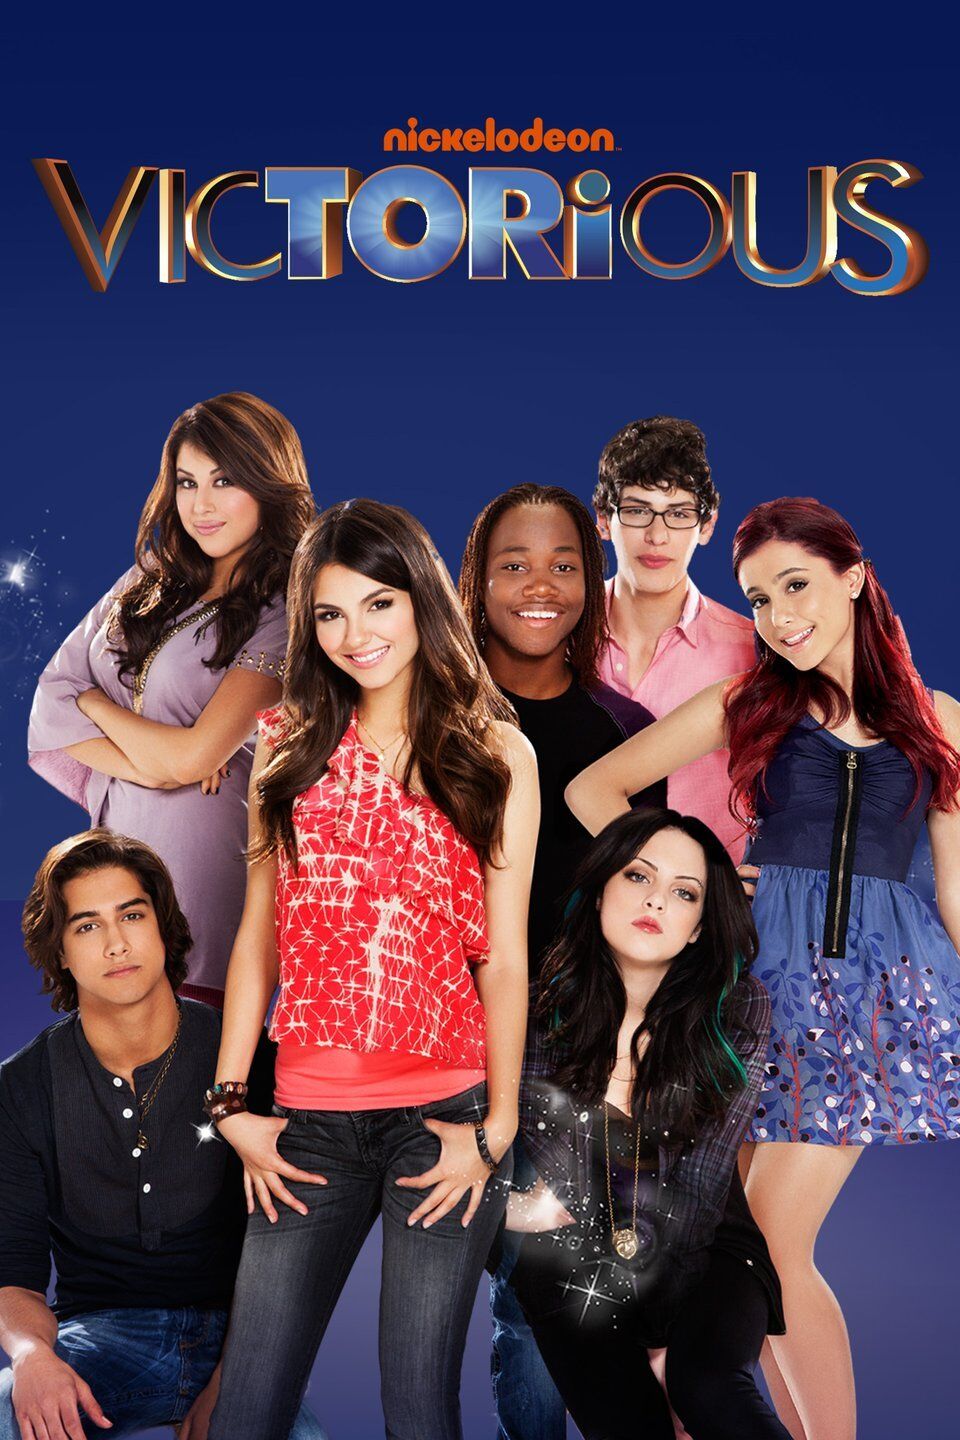 Pin by Ruth Jacqueline on Victoria justice  Victoria justice, Victorious  tori, Tori vega